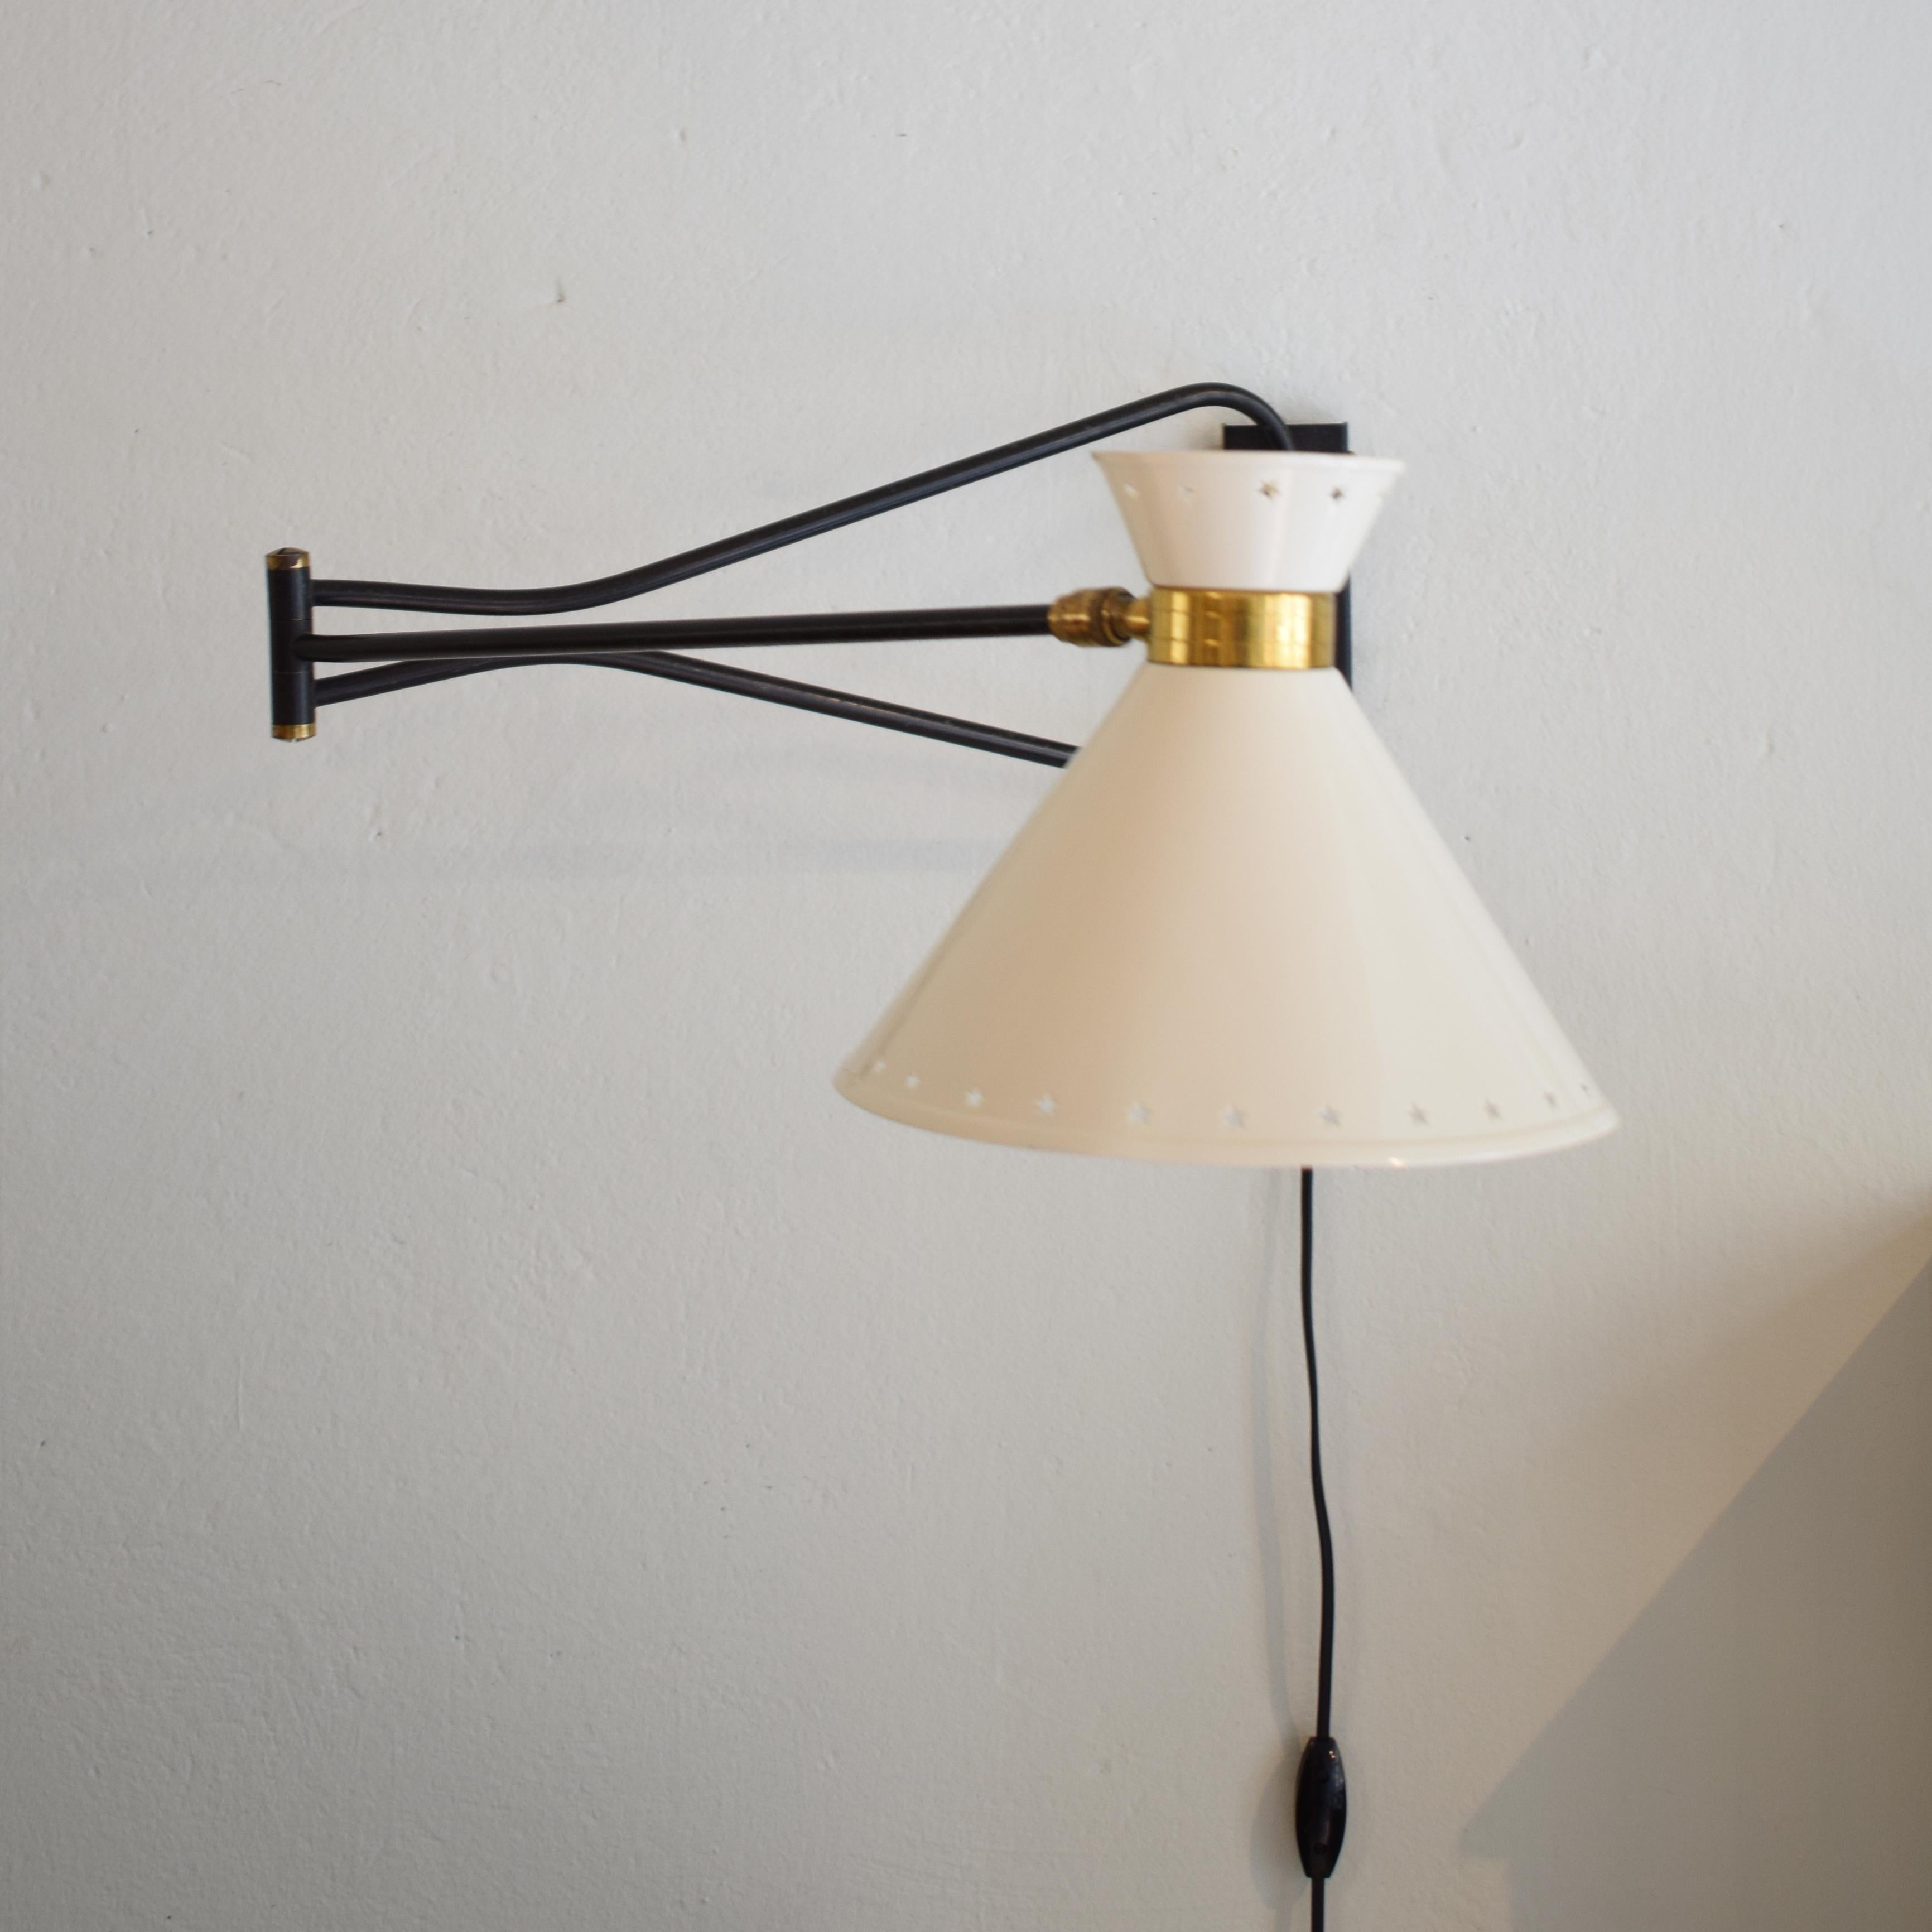 French Midcentury Creme Swing Arm Wall Light Lamp by Rene Mathieu / Lunel, 1950 13